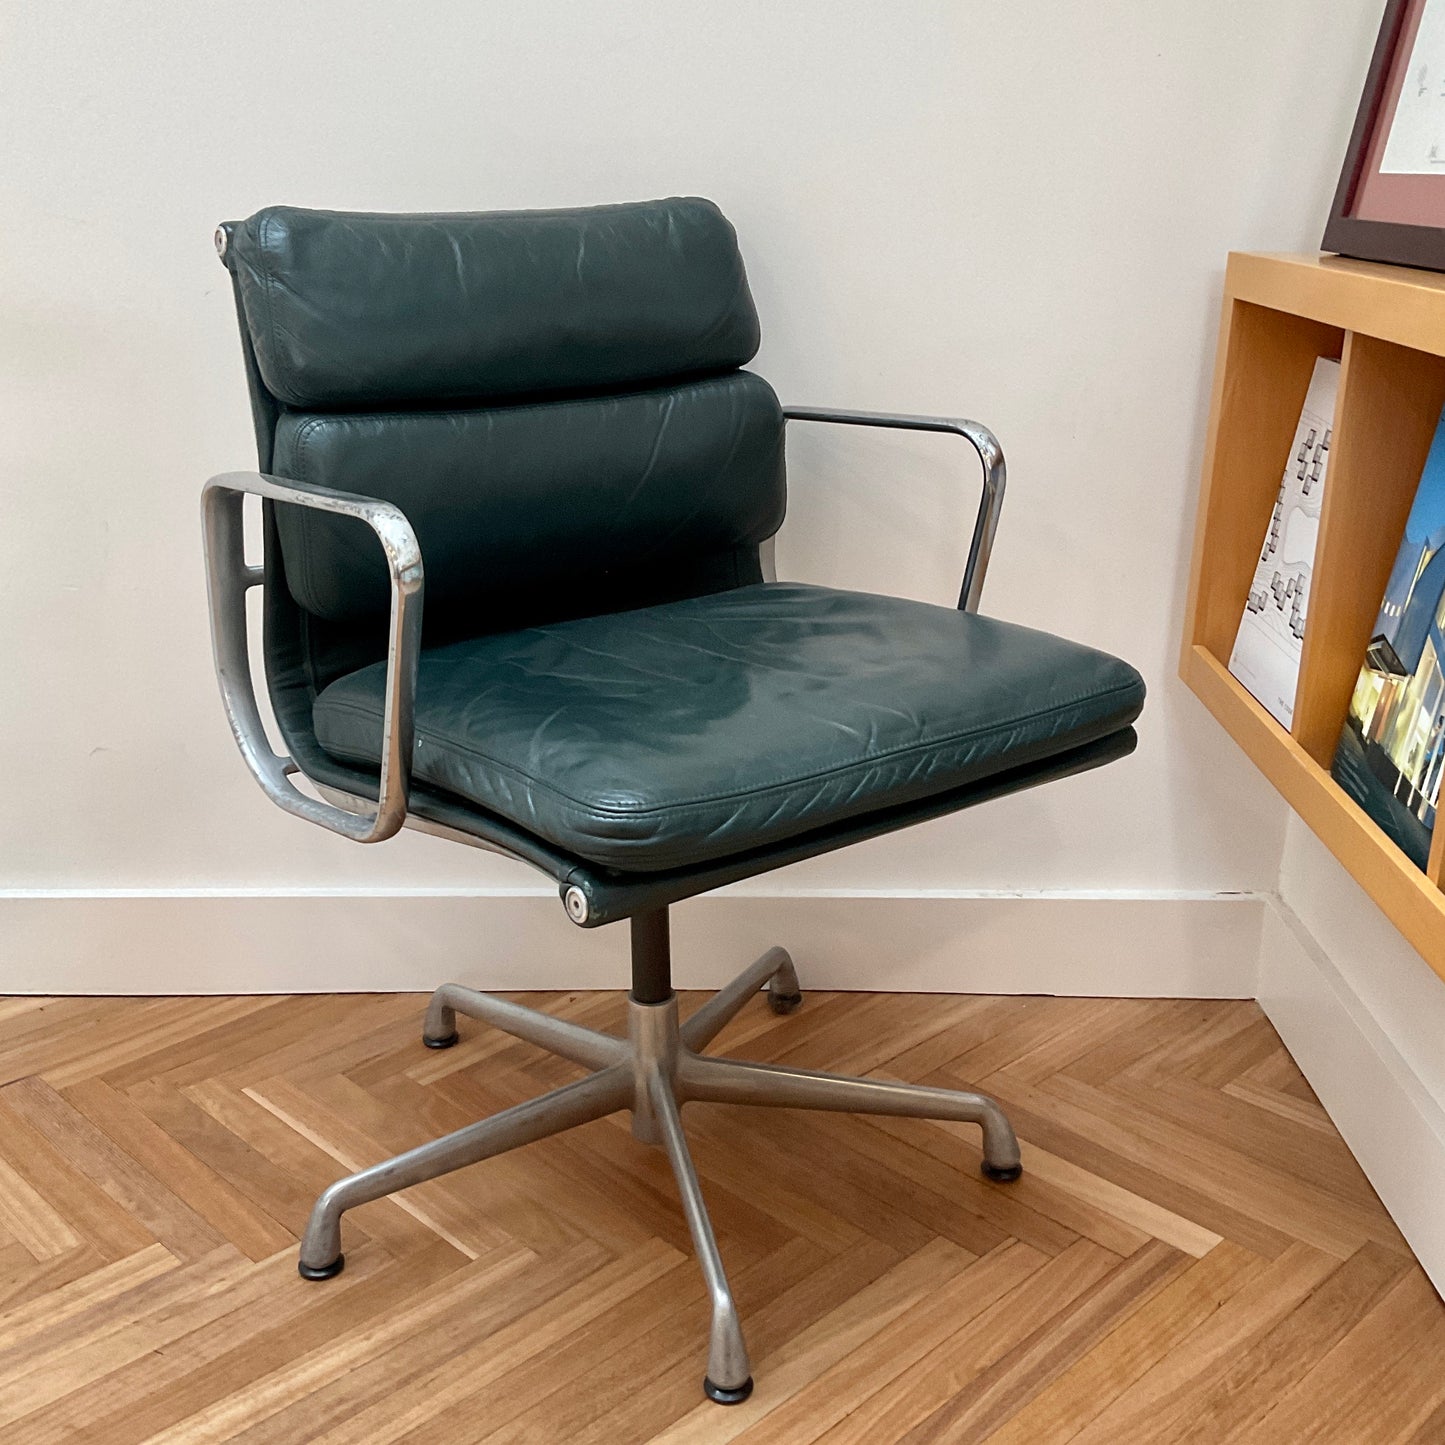 Vintage Eames Soft Pad Chair by Herman Miller (2 available)